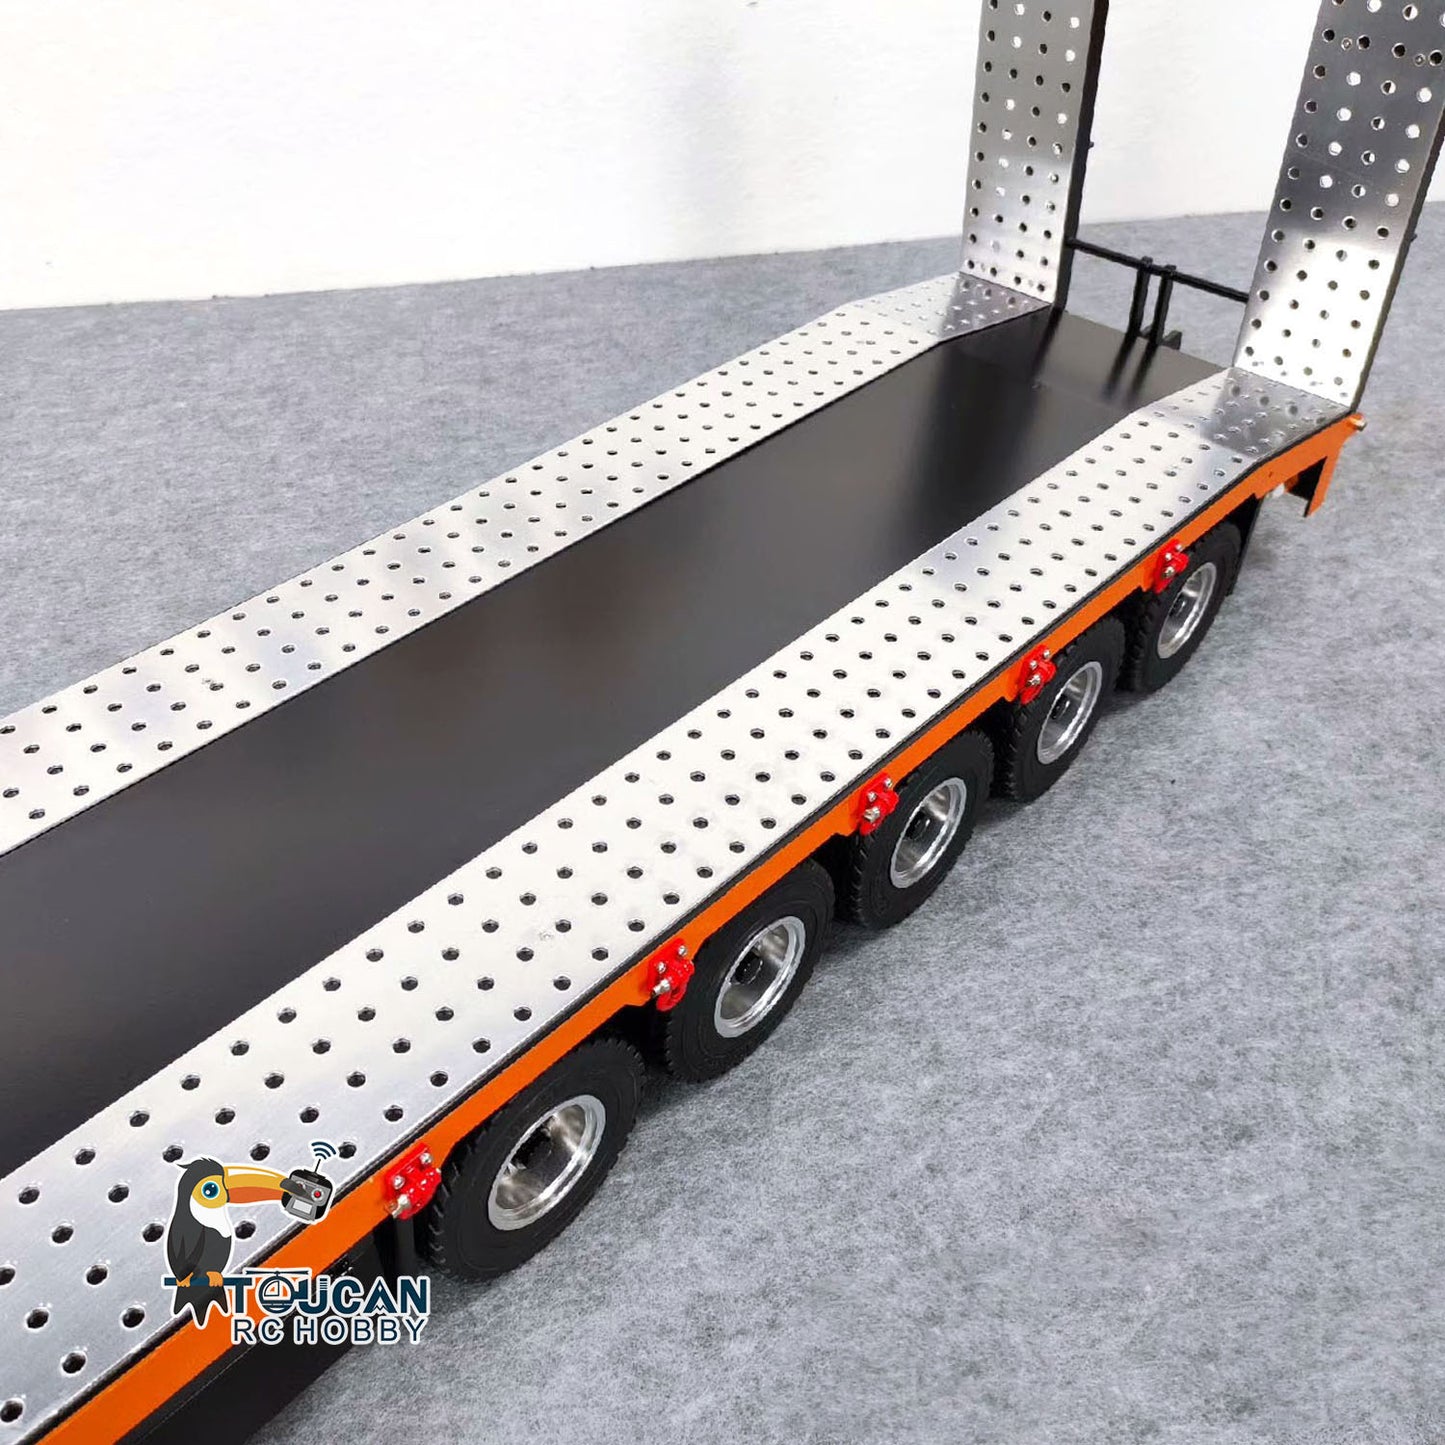 Metal 5-axle Trailers Electric Tail-board Support Leg for 1/14 RC Tractor Radio Controlled Truck Car Hobby Models DIY Painted Assembled